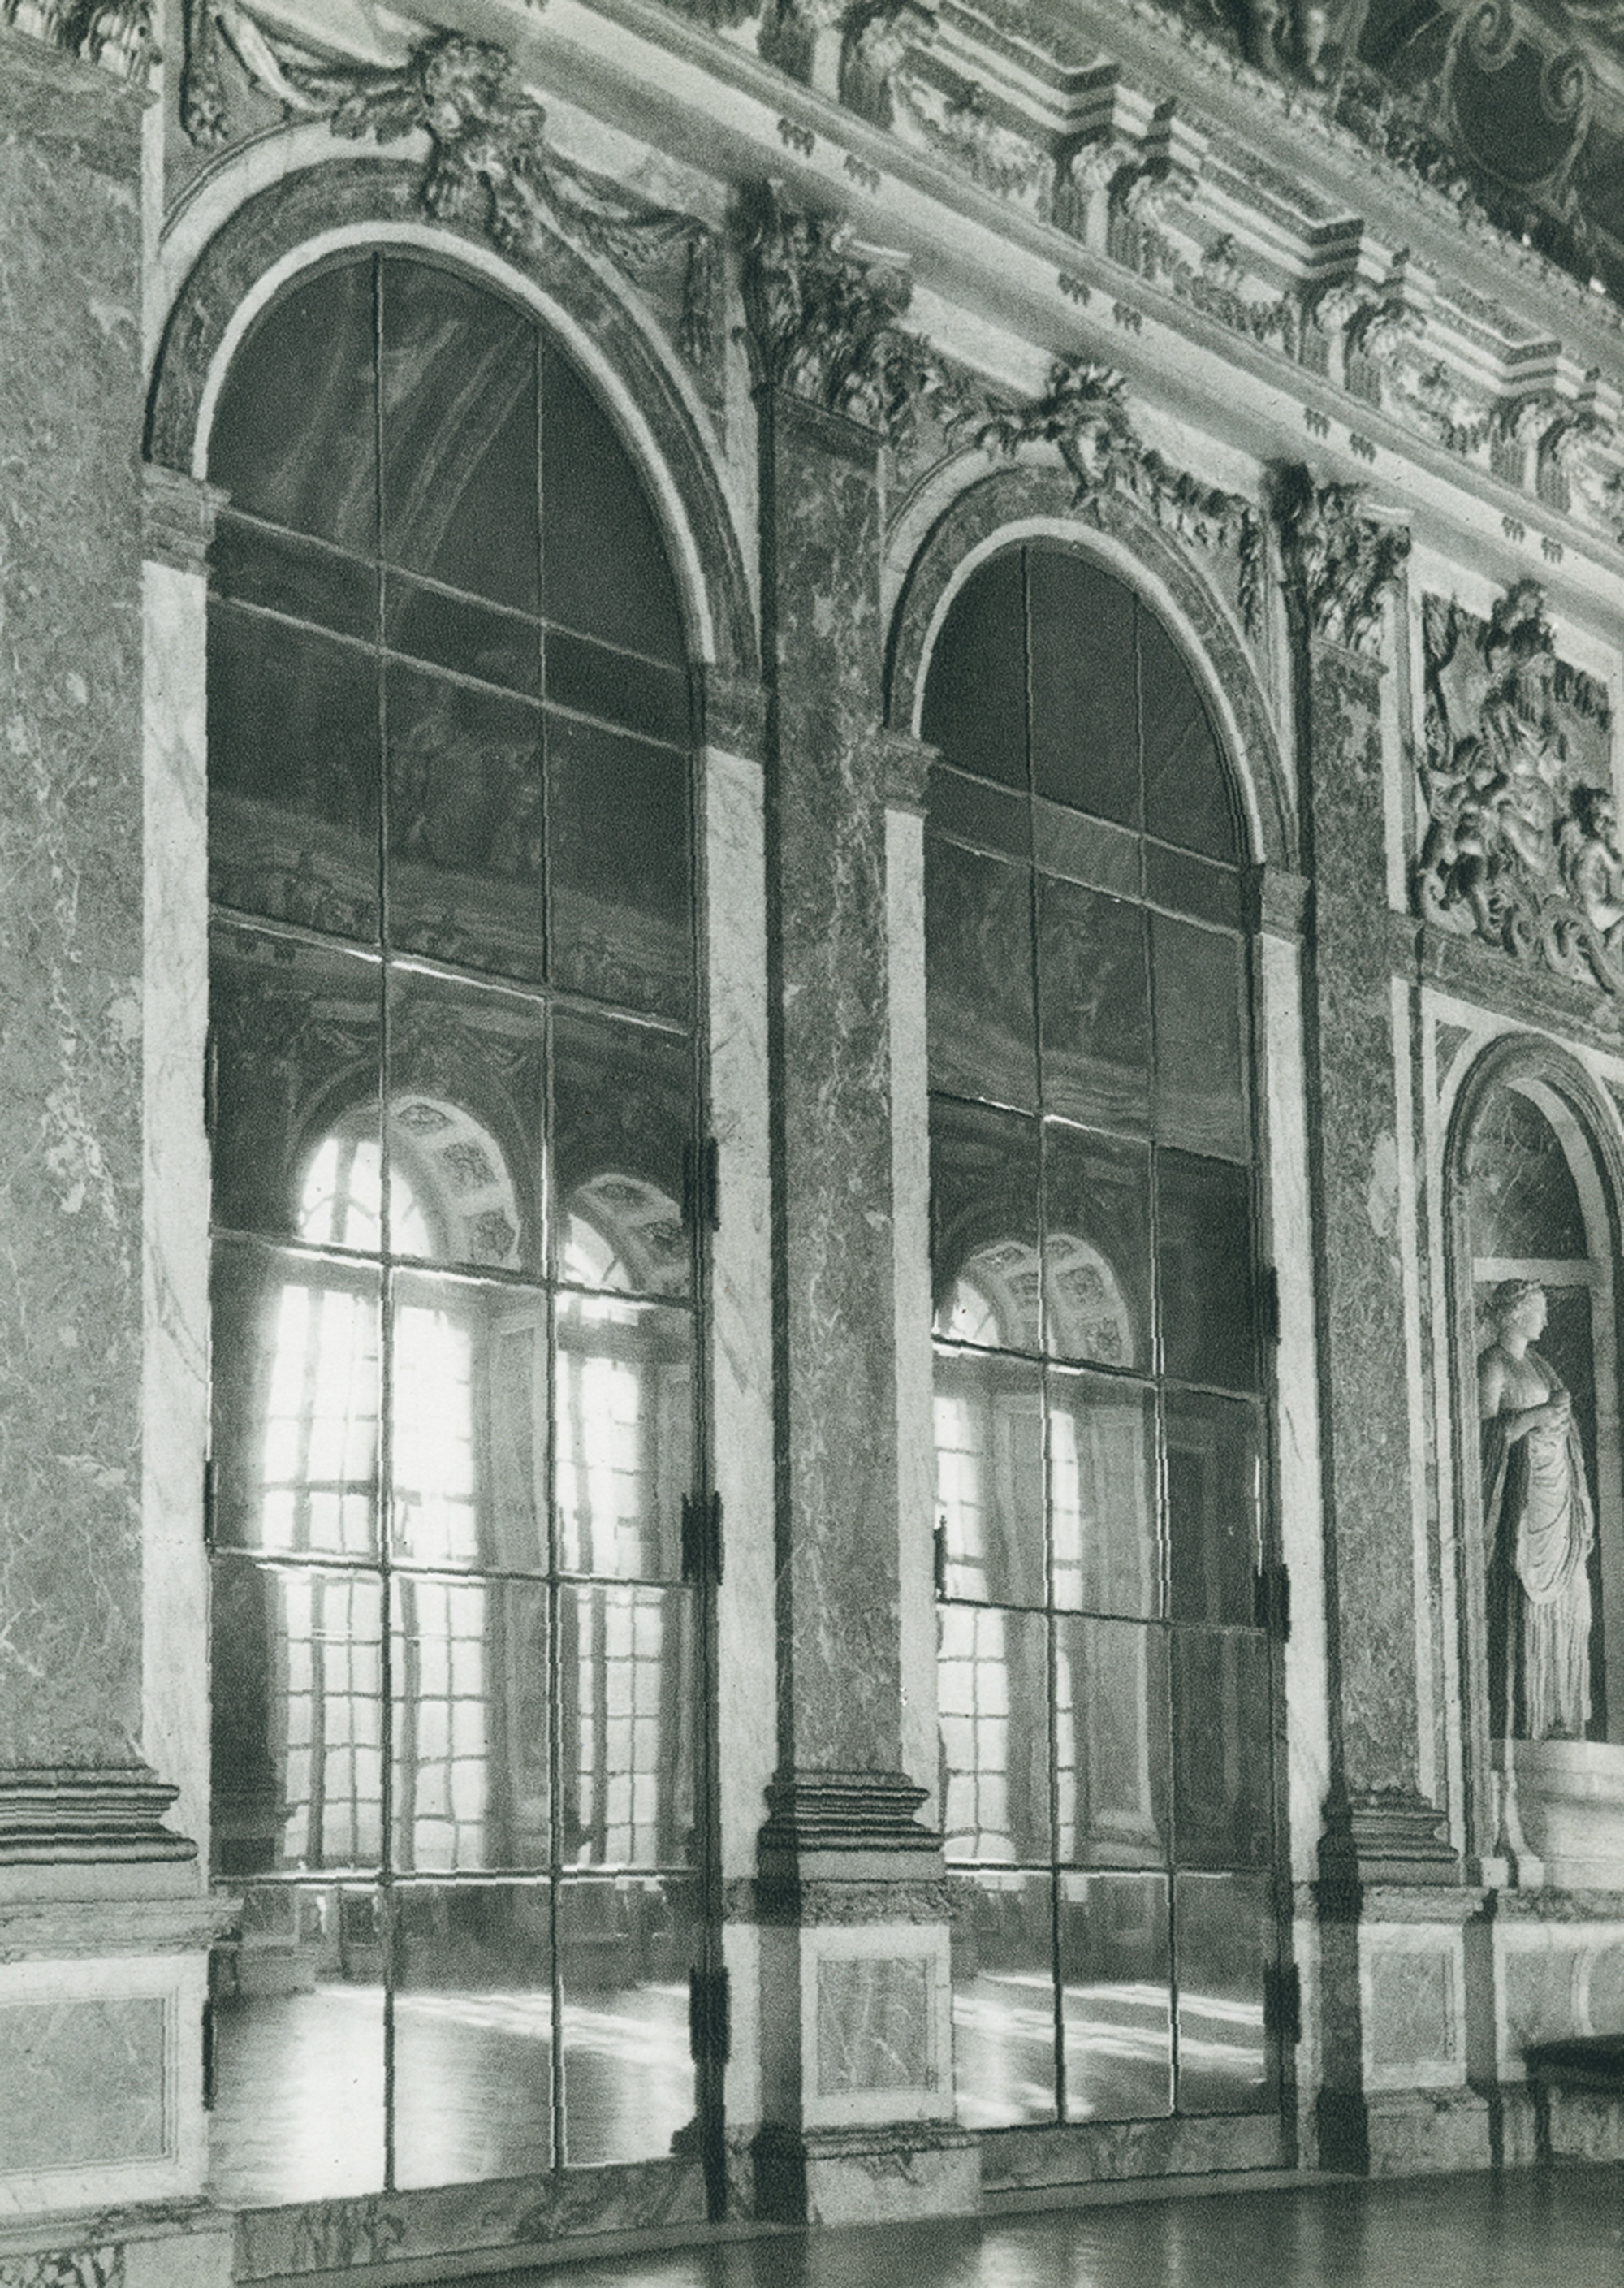 A photograph of Louis XIV’s Hall of Mirrors in the Palace of Versailles.